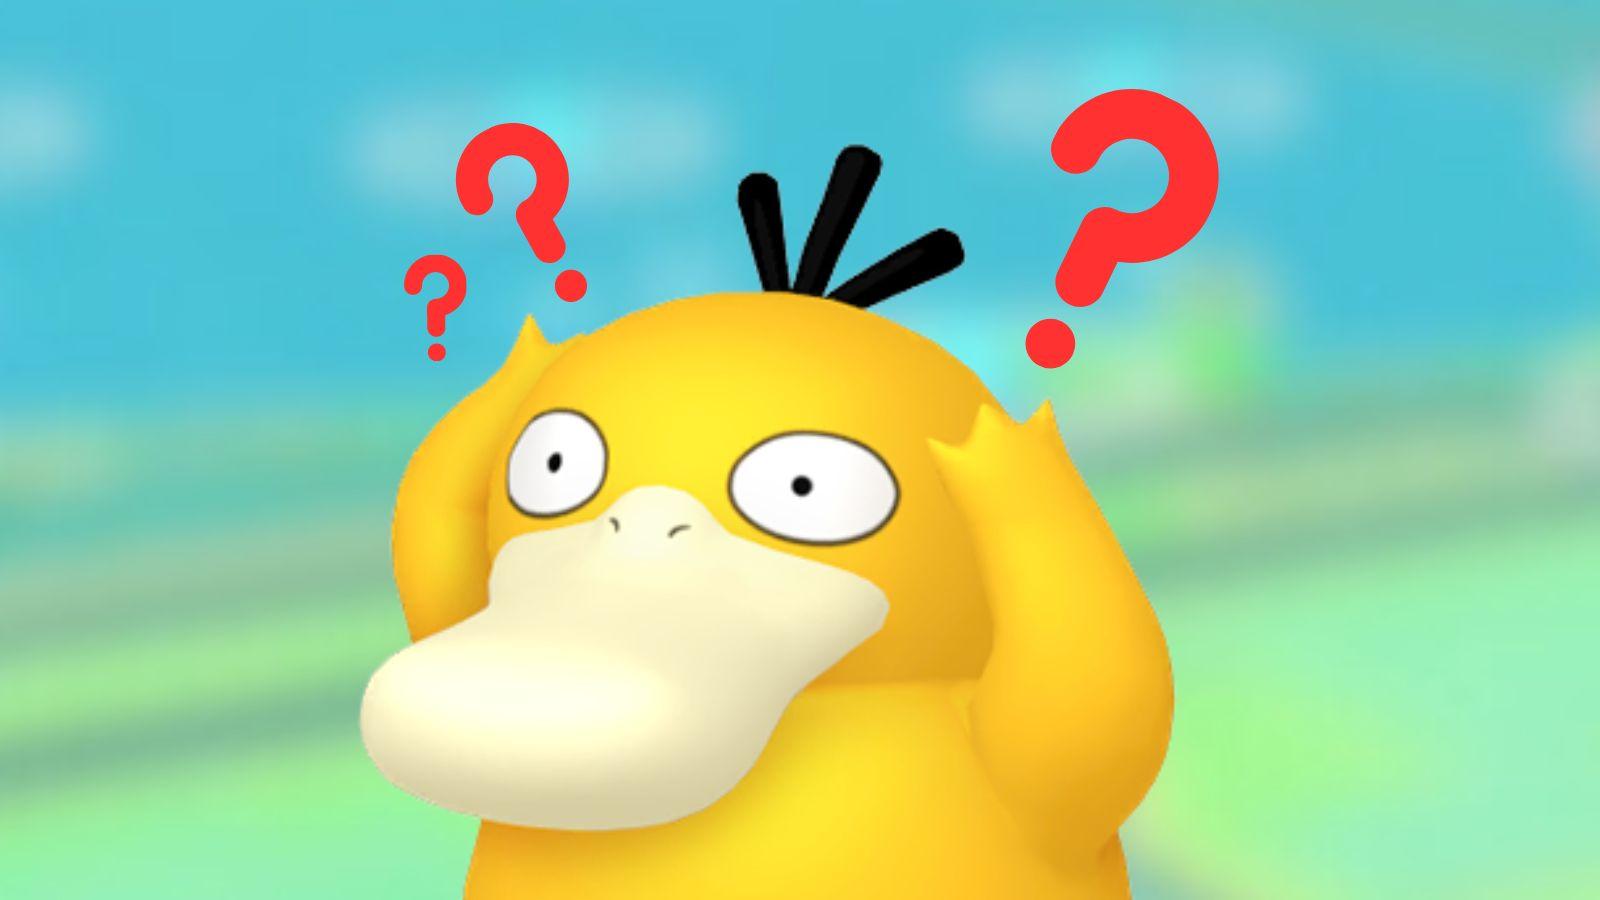 Psyduck with question marks and Pokemon Go background.